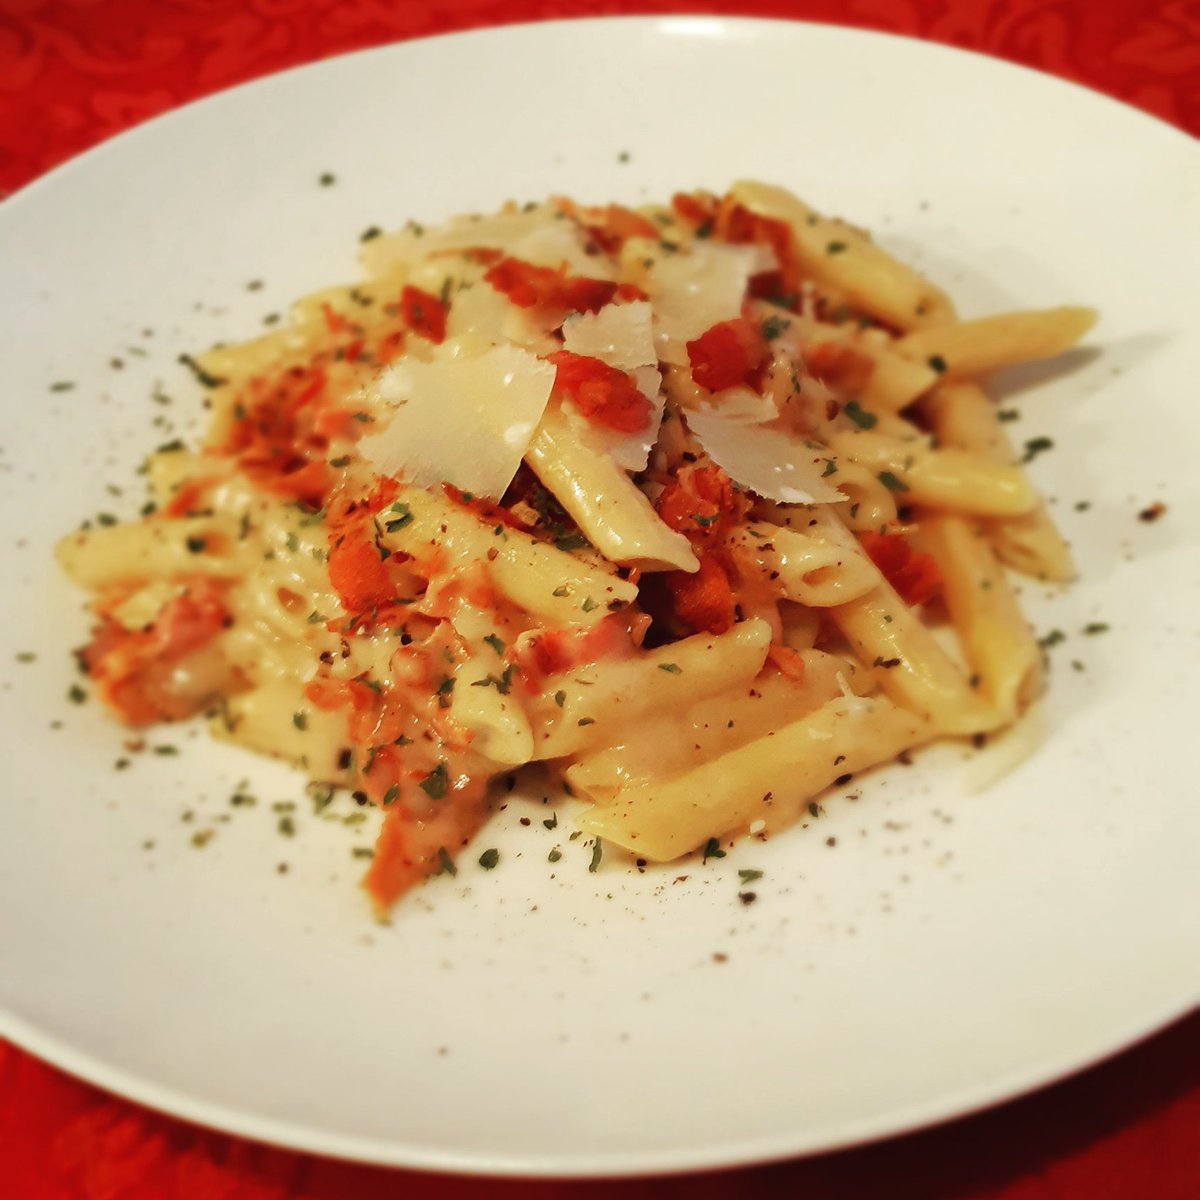 Alfredo and Roasted Garlic with Bacon and Penne Pasta #penne #alfredosauce #garlic #bacon #baconmakeseverythingbetter #redpepperflakes #crackedpepper #parmesancheese #parsley #homecooking #homechef #chefathome #mykitchen #myhappyplace #goodeats #tastythursday #simplydelicious